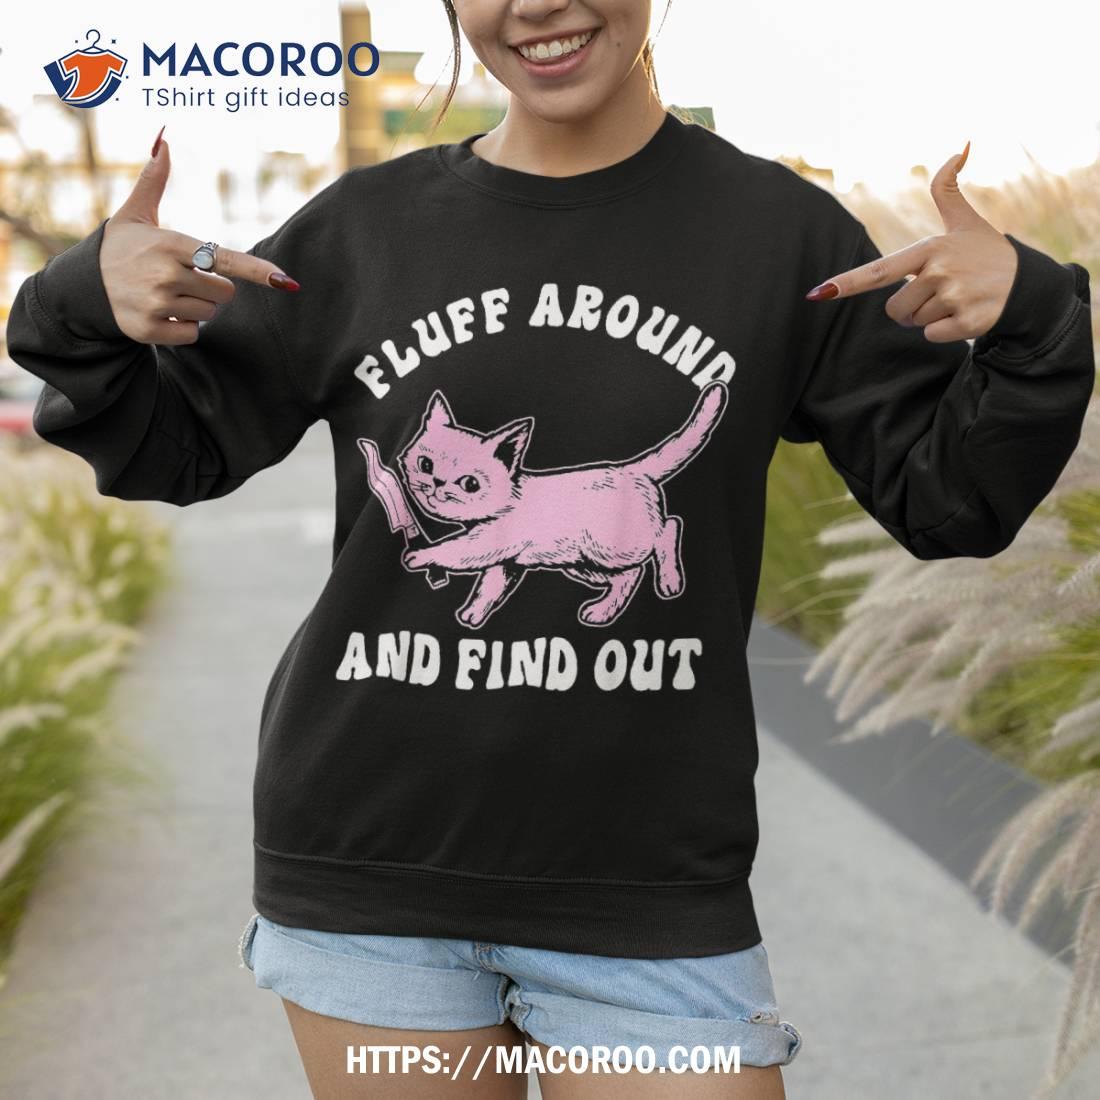 Fluff Around And Find Out For Cat Lovers Shirt